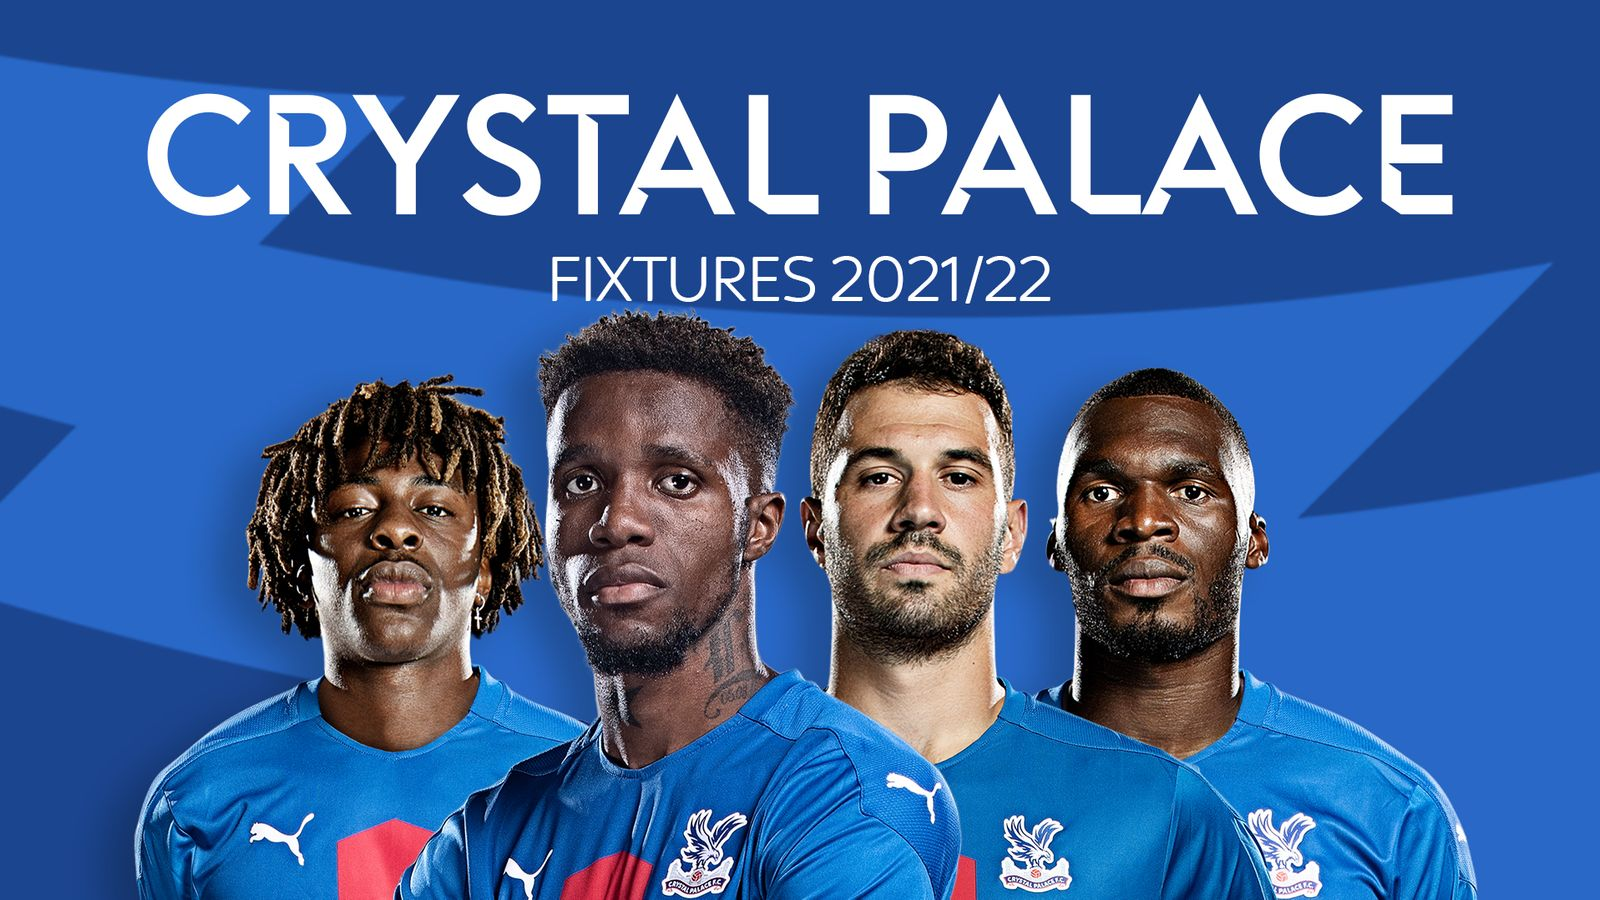 Crystal Palace Premier League 2021-22: Fixtures and Match Schedules in Full